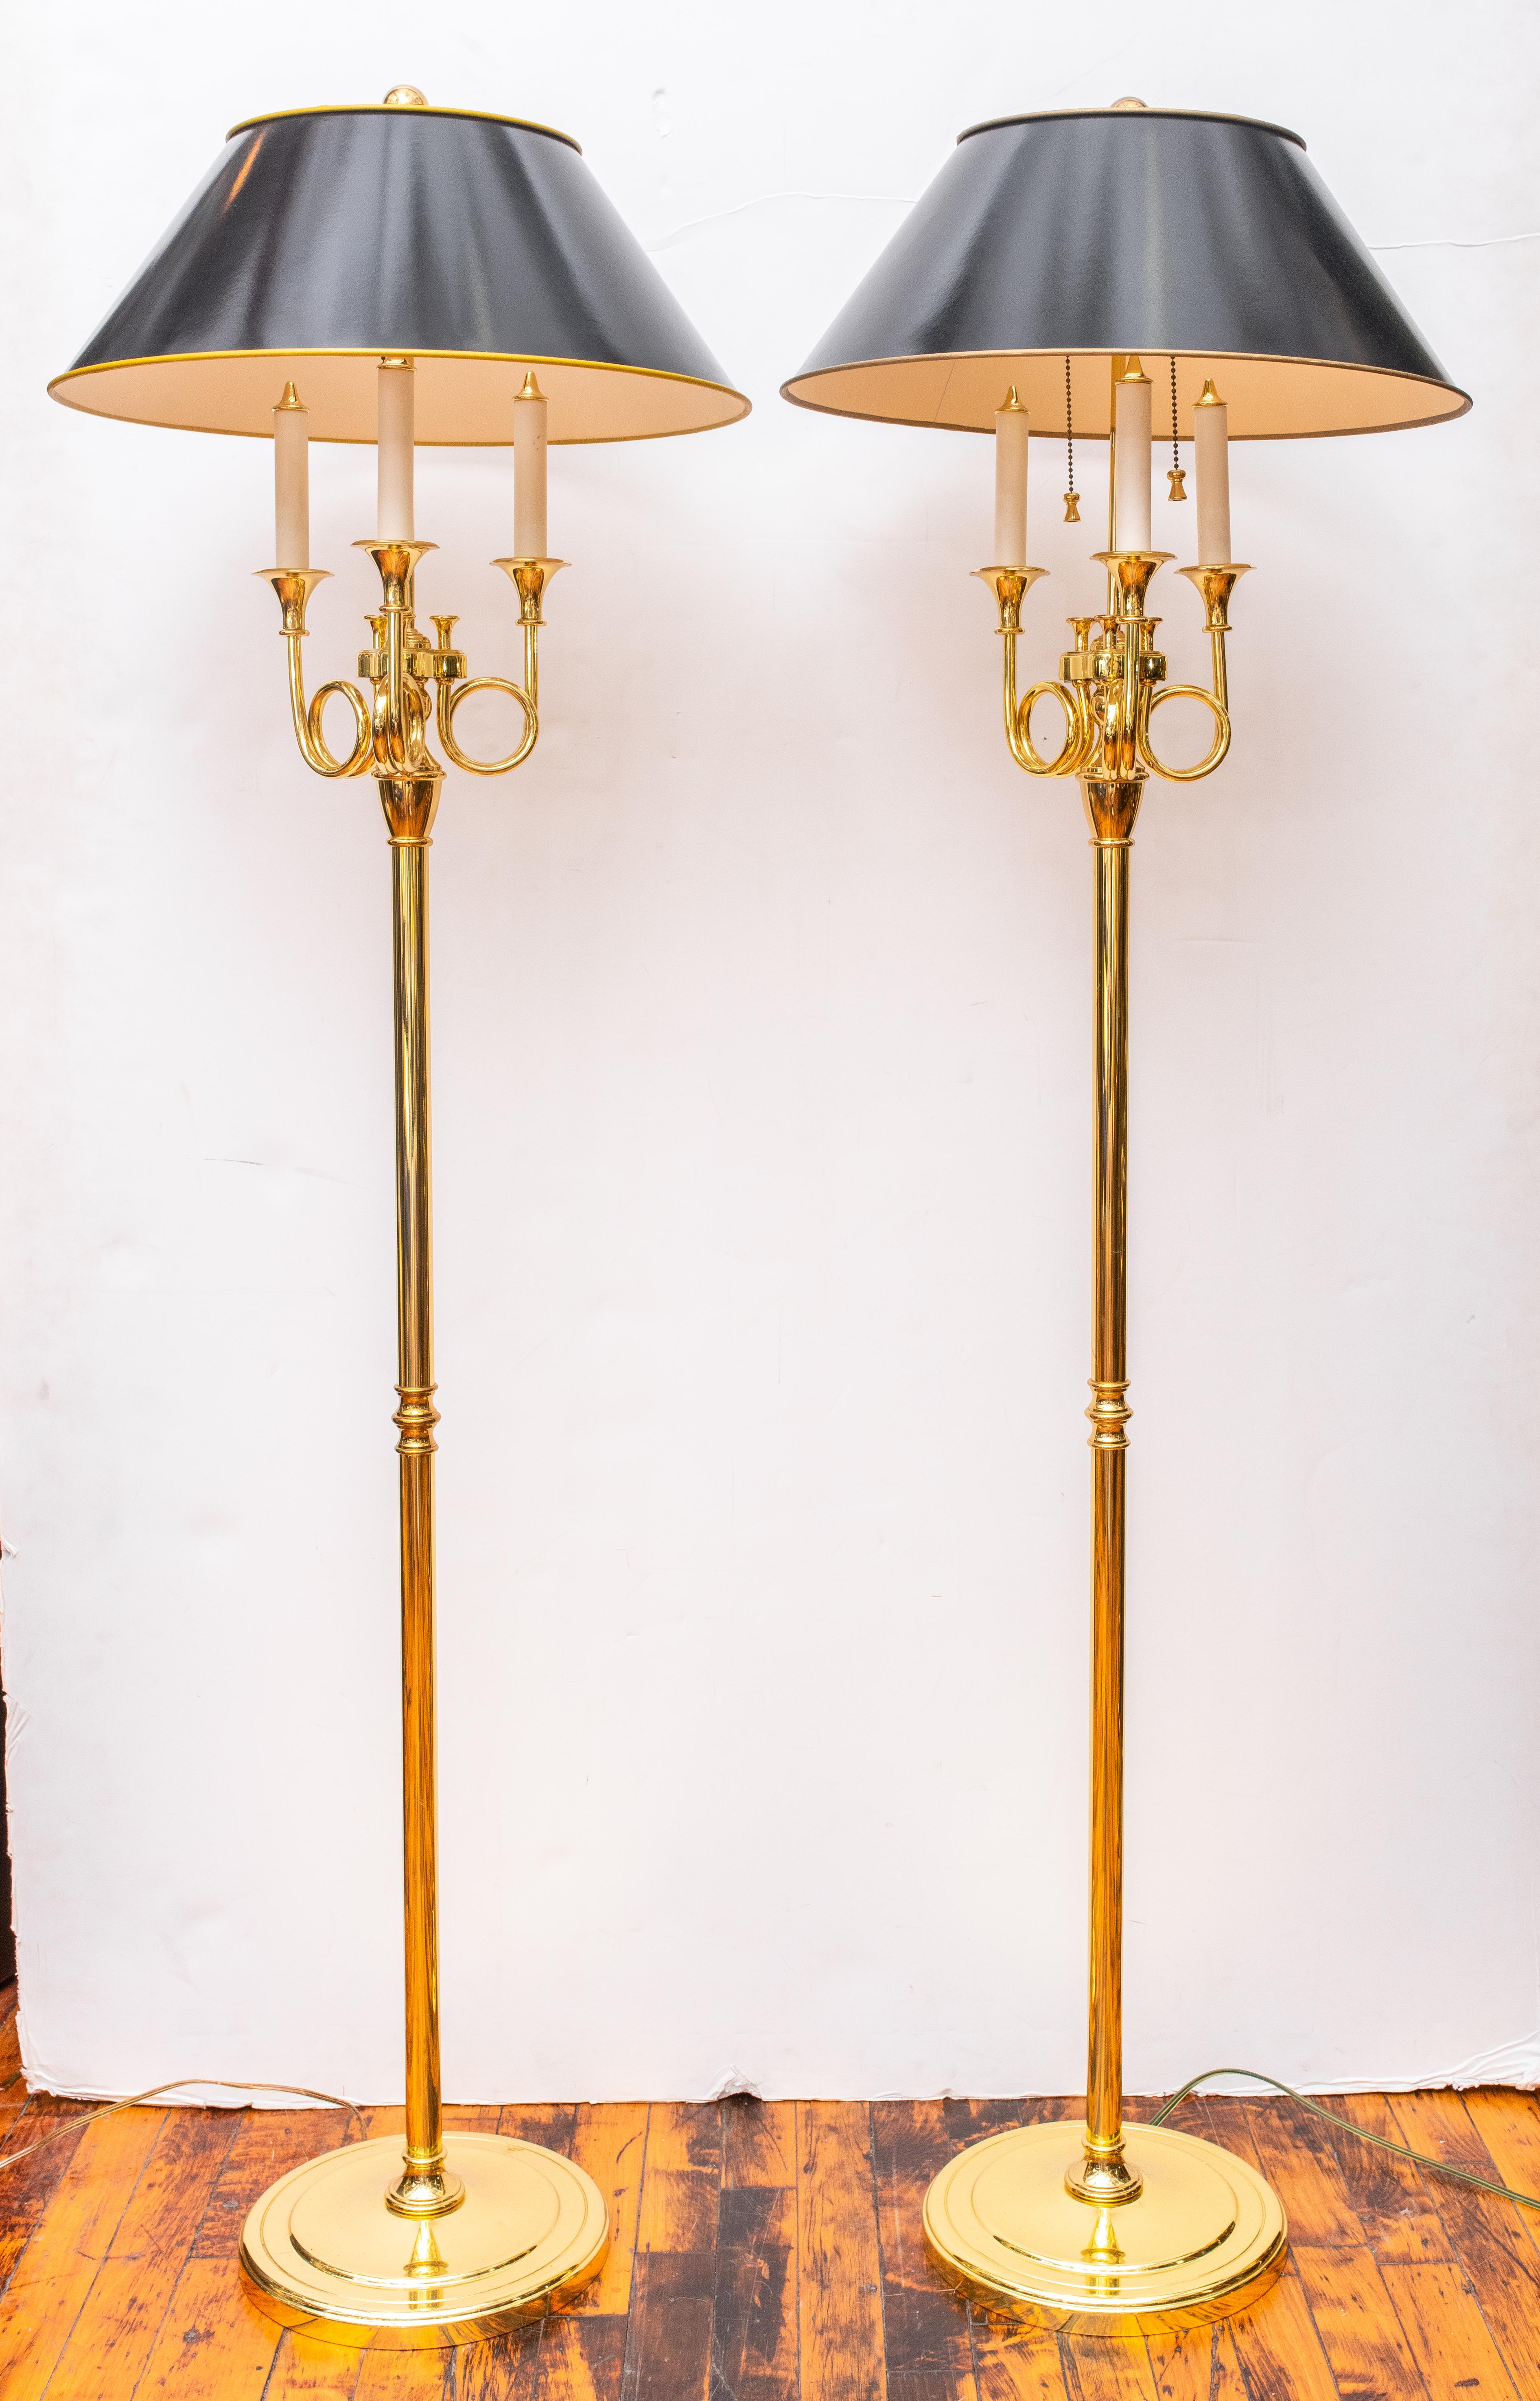 Pair of Baldwin heavy brass floor lamps with black shades. Made in the USA in the 1980s. Very good condition; wear consistent with with age and use. Signed.